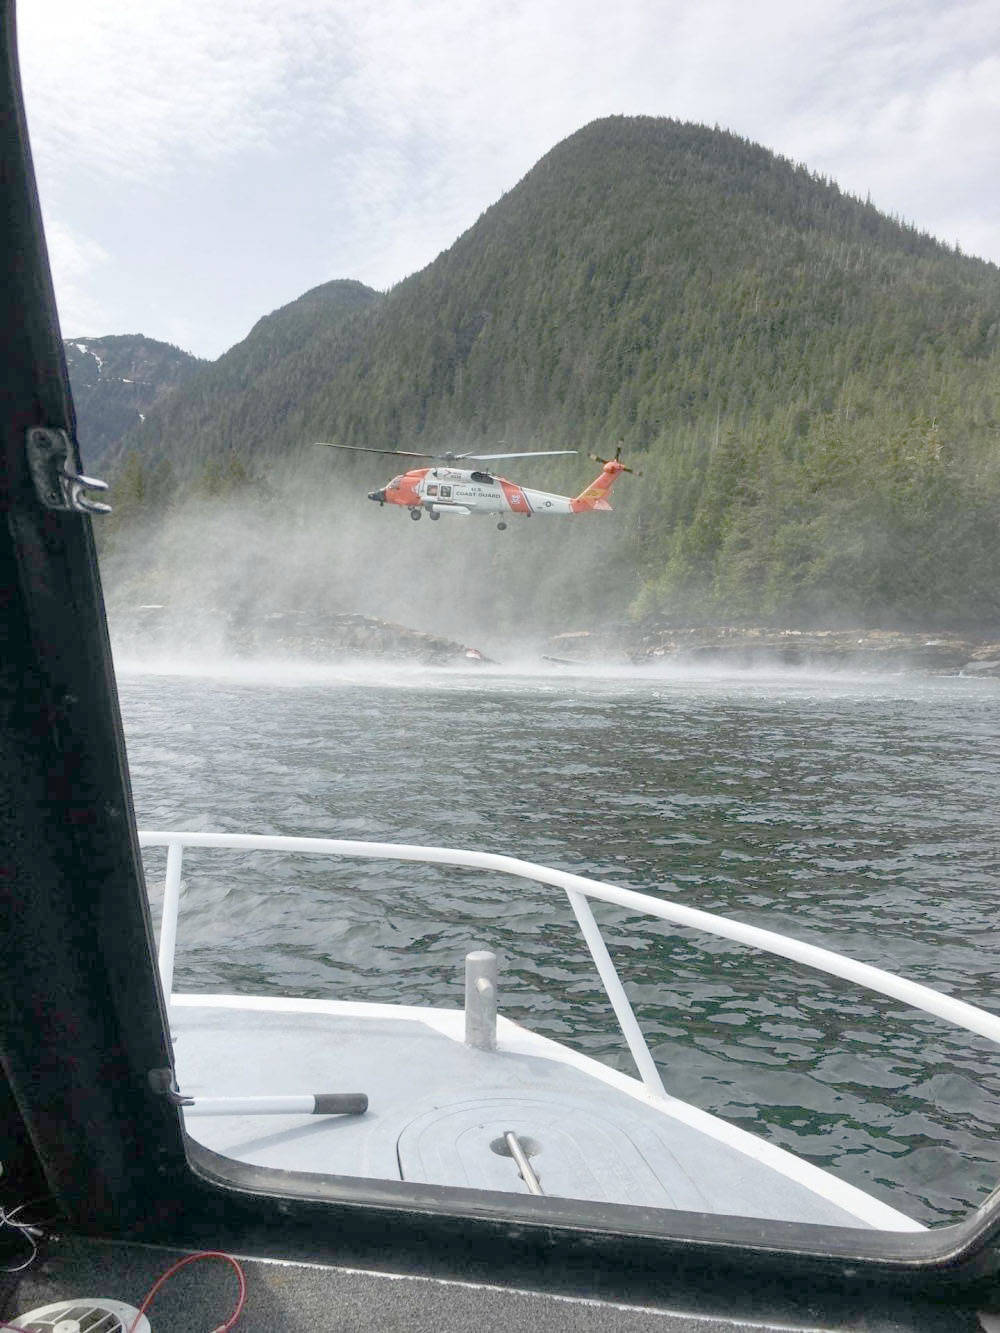 A Coast Guard Air Station Sitka MH-60 Jayhawk helicopter crew hovers while searching for a survivor from a report of two aircraft colliding in the vicinity of George Inlet near Ketchikan, Tuesday. Ten survivors of the crash had reportedly swam to shore and were rescued by Coast Guard aircrews while the search continues for two people still reported to be missing from the crash. (Courtesy photo/Ryan Sinkey)